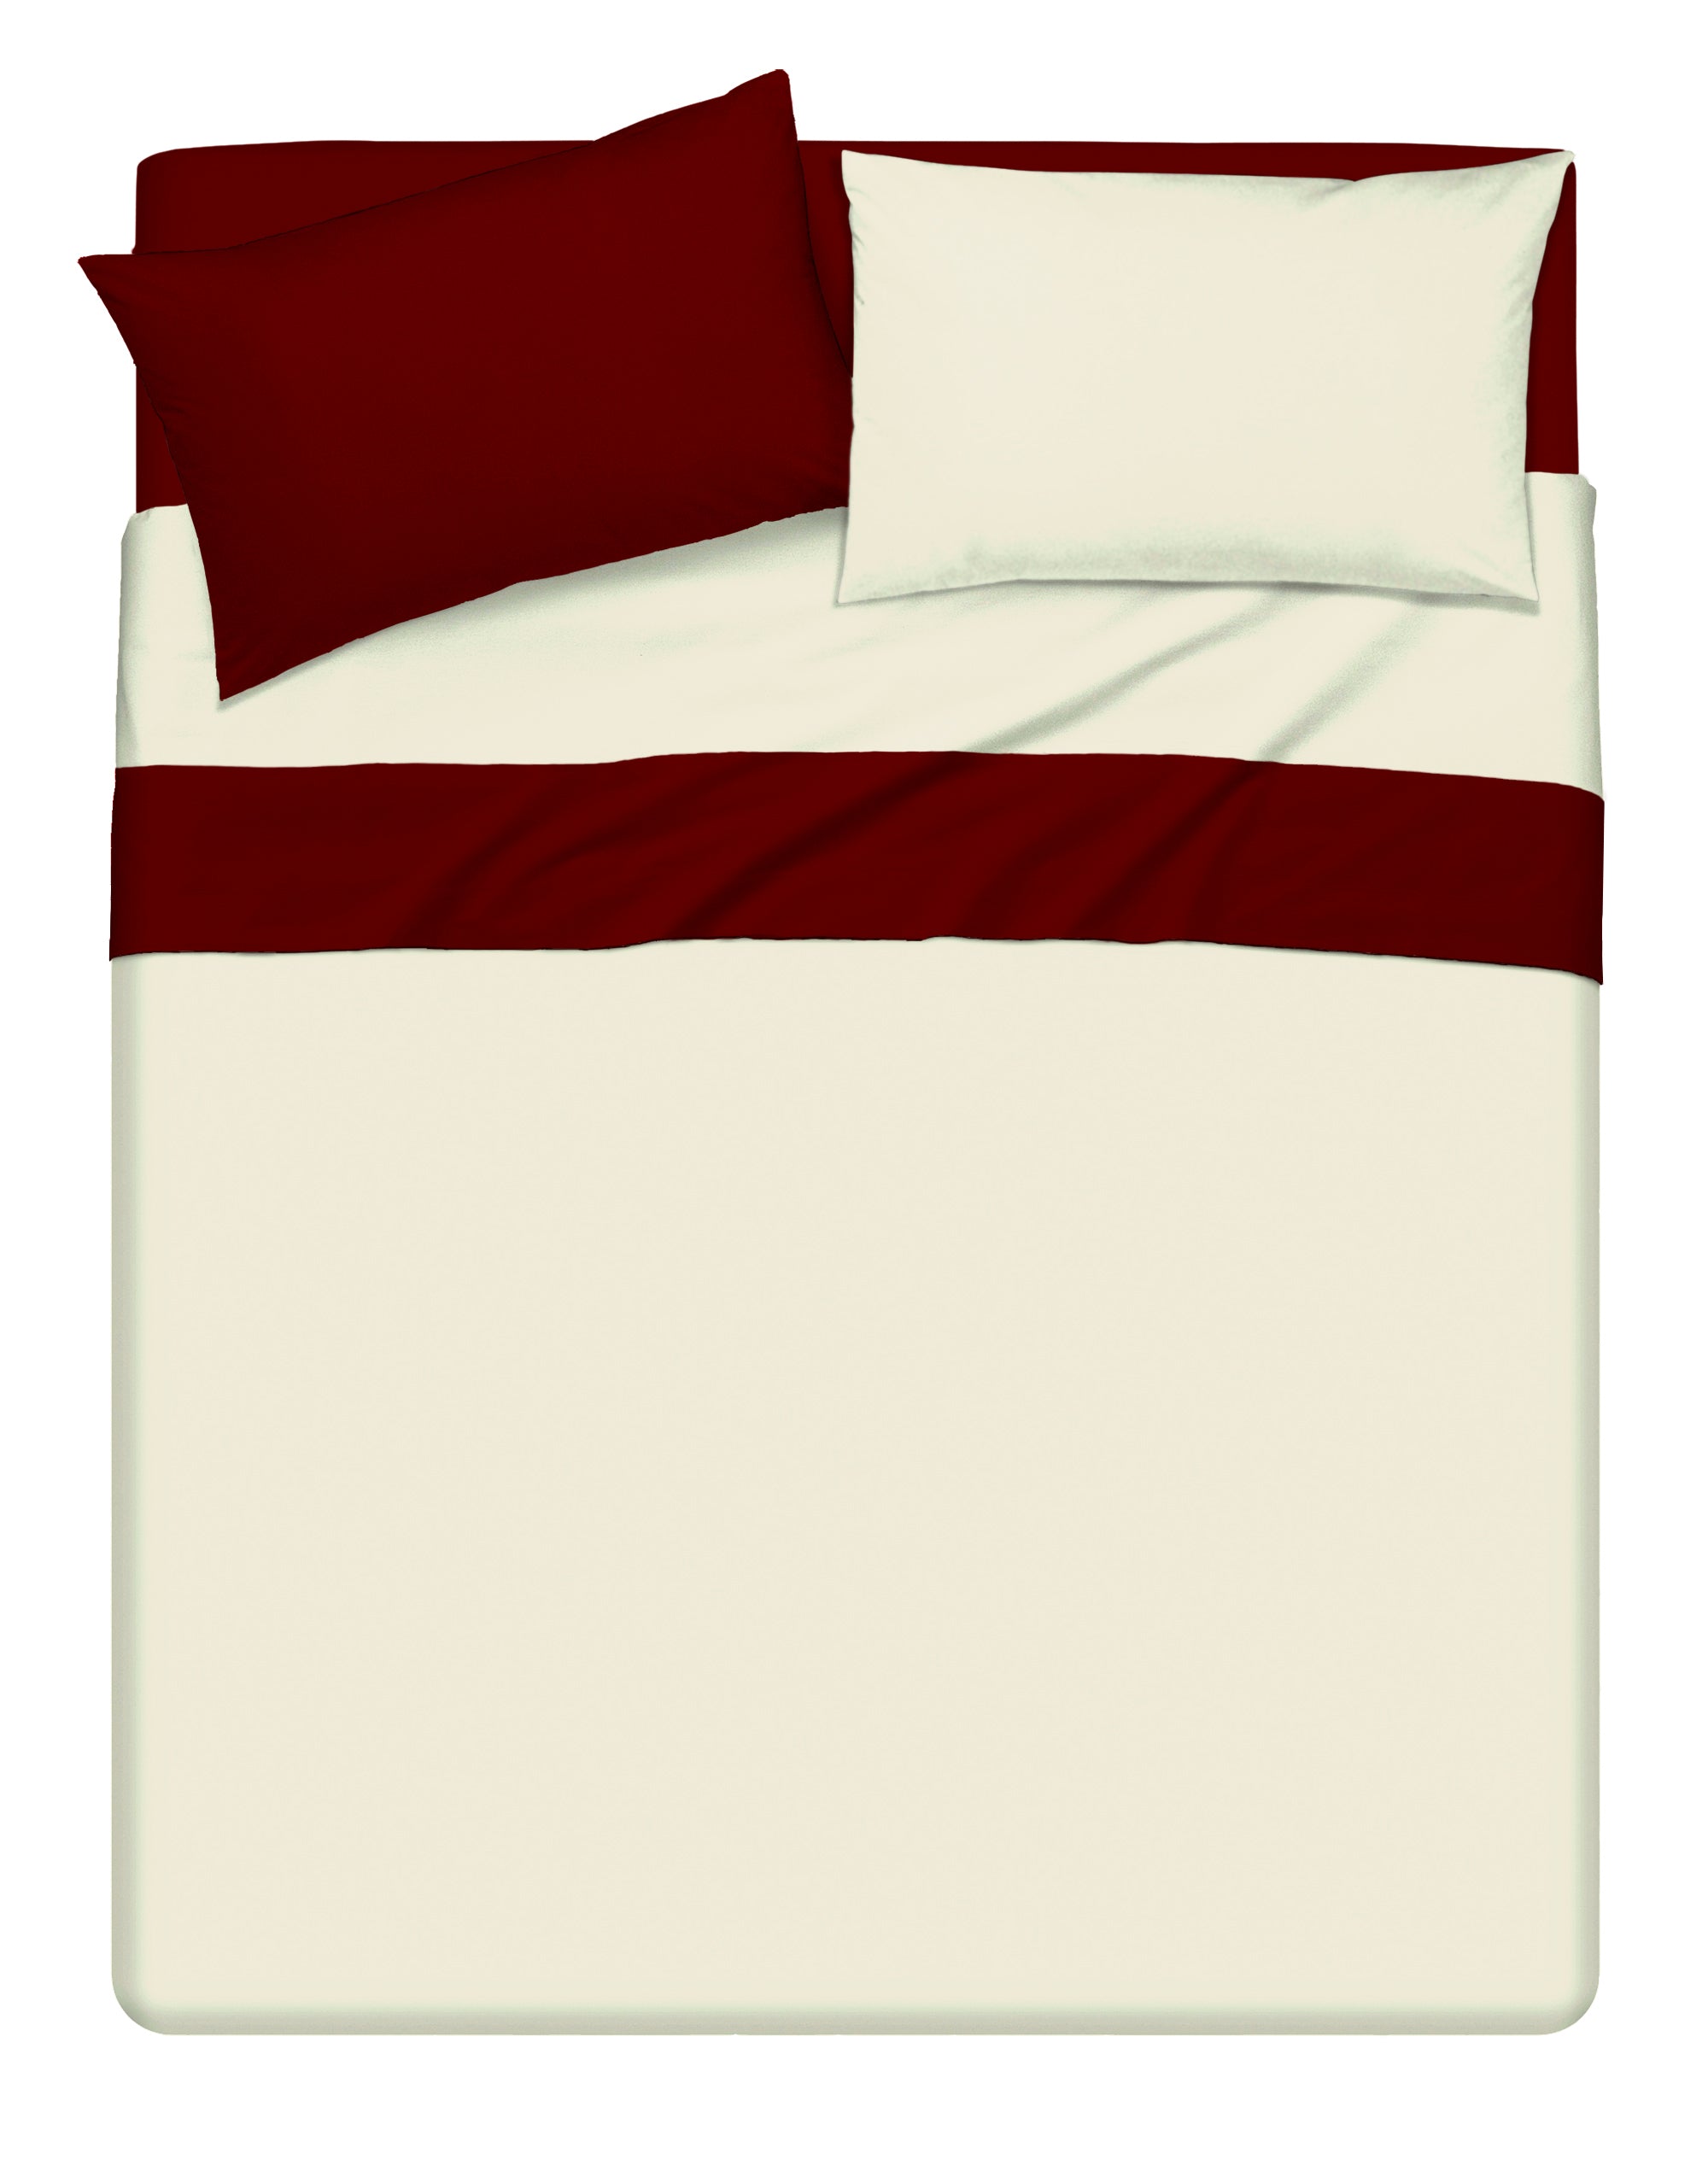 Completo letto lenzuola bicolor in 100% cotone made in Italy BEIGE/BORDEAUX